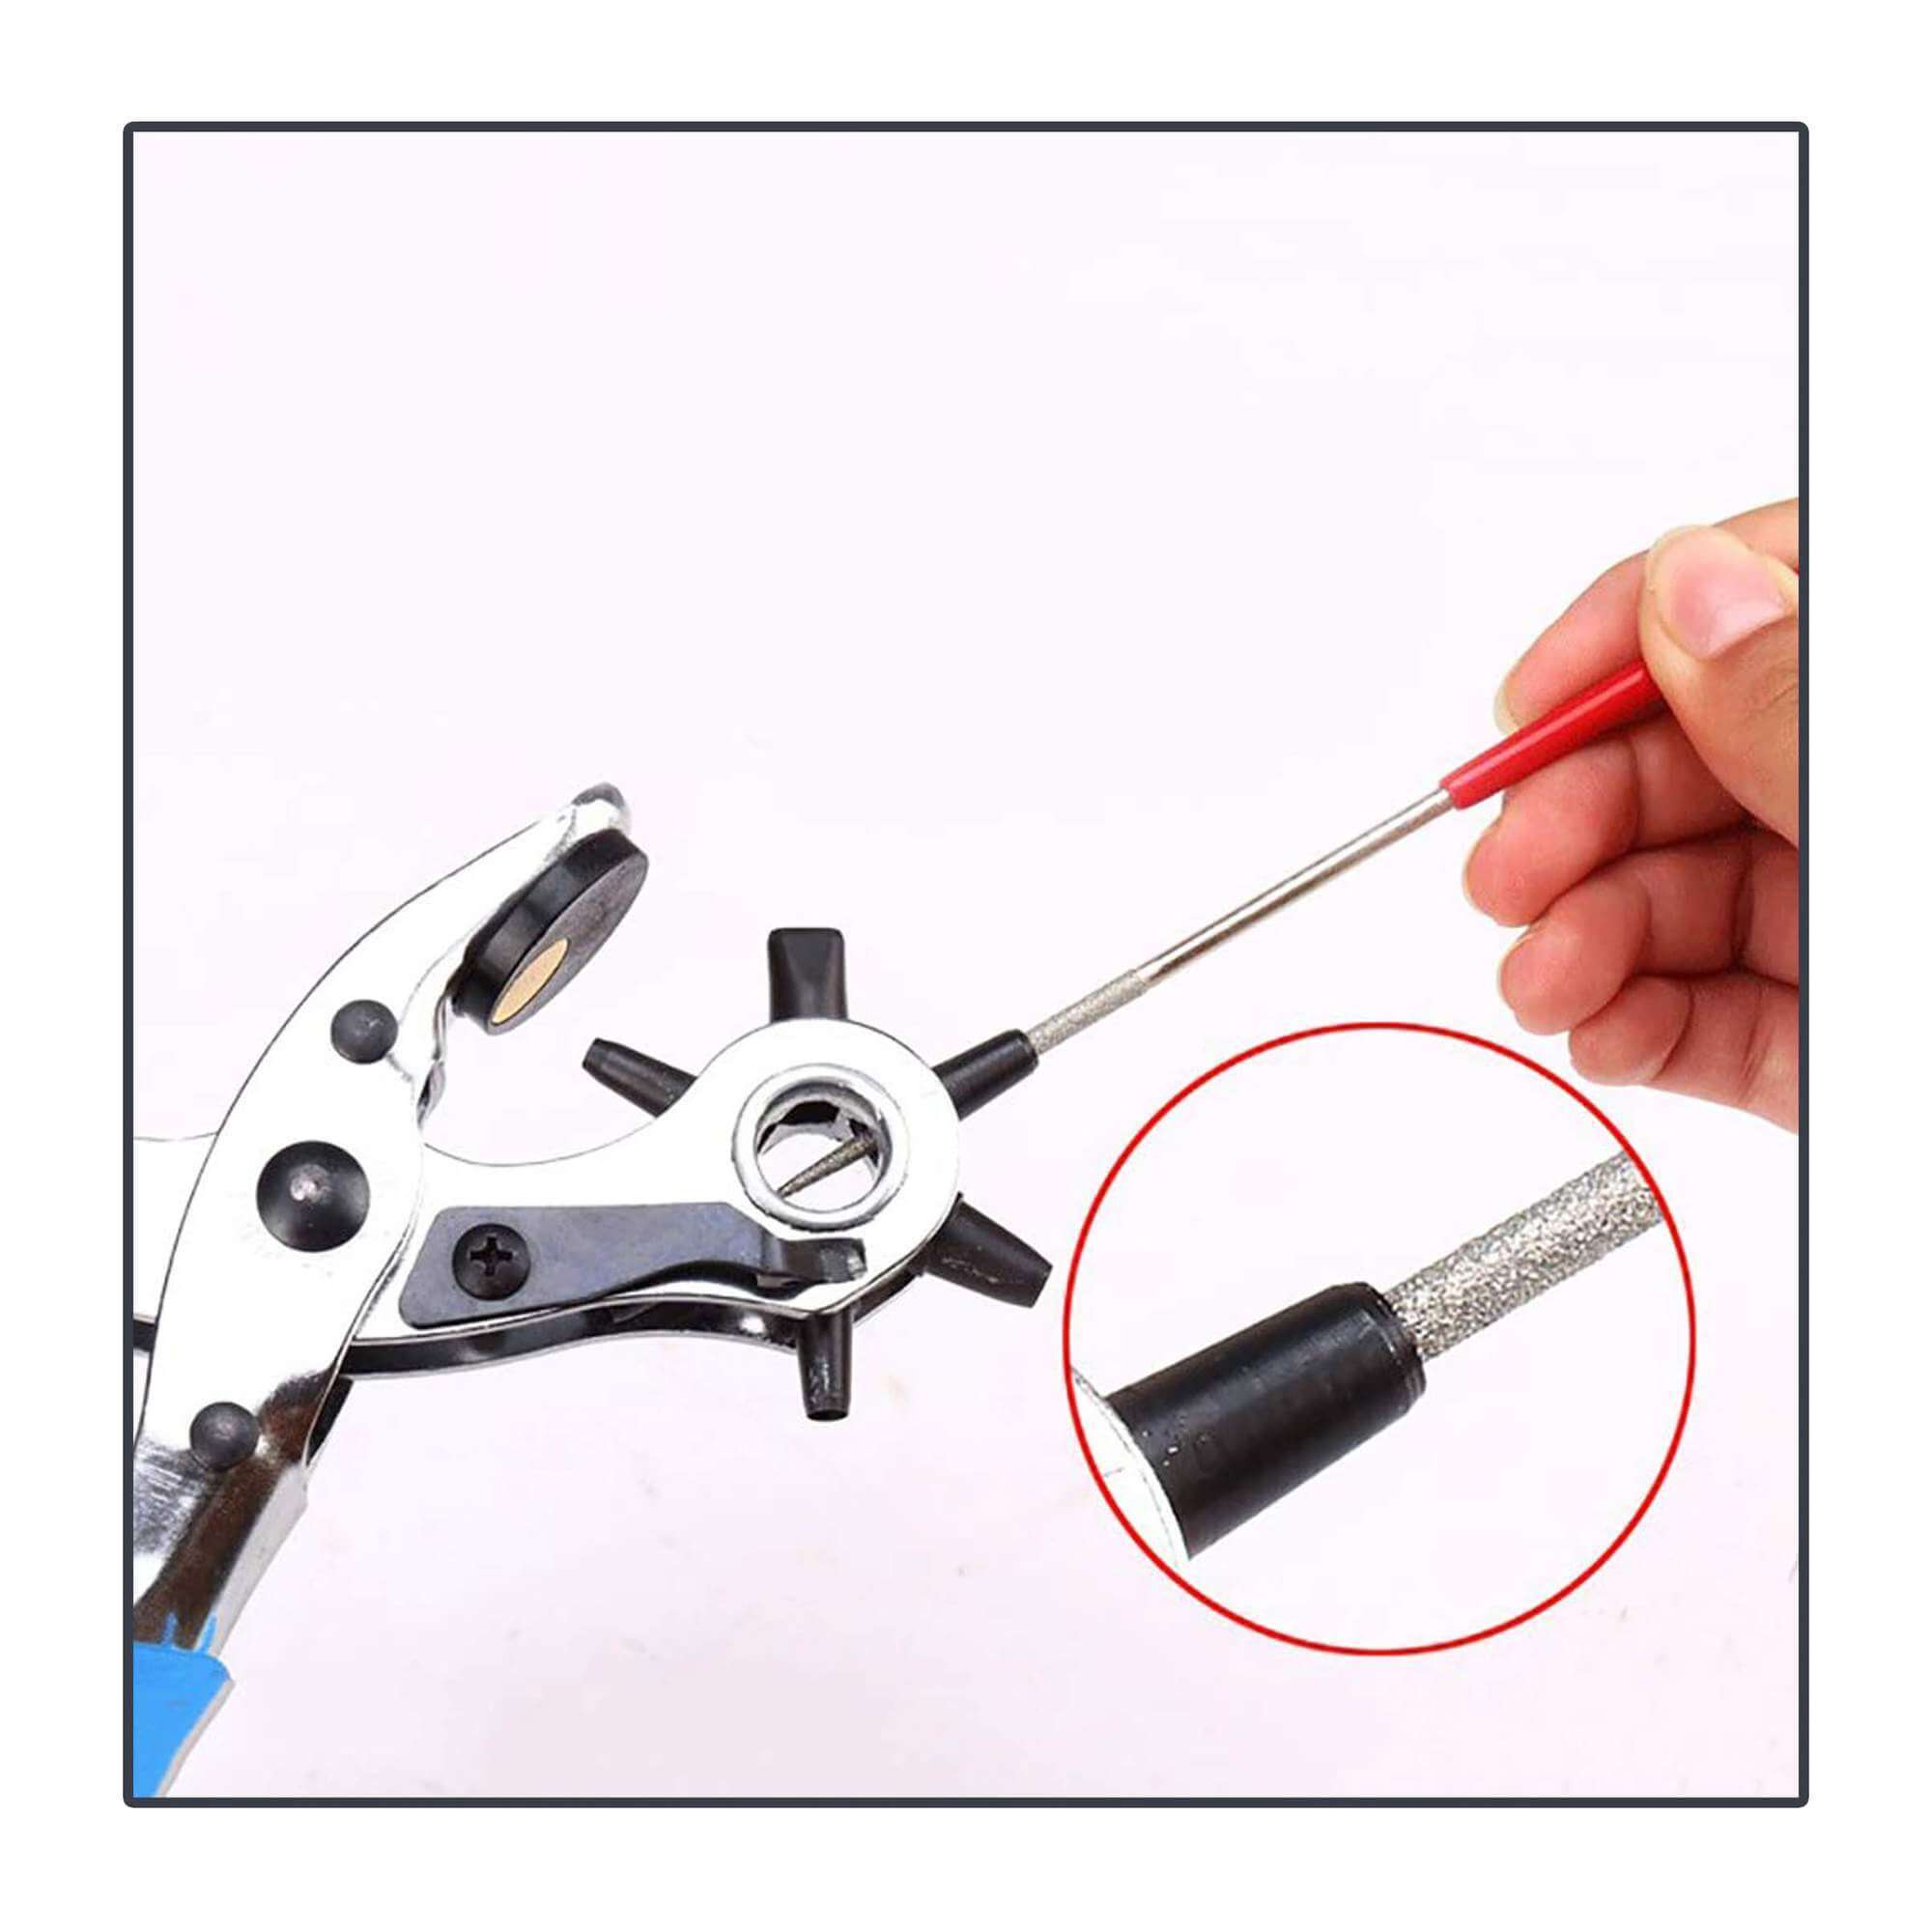 6 Different Hole Sizes Best Belt Hole Puncher Leather Hole Punch